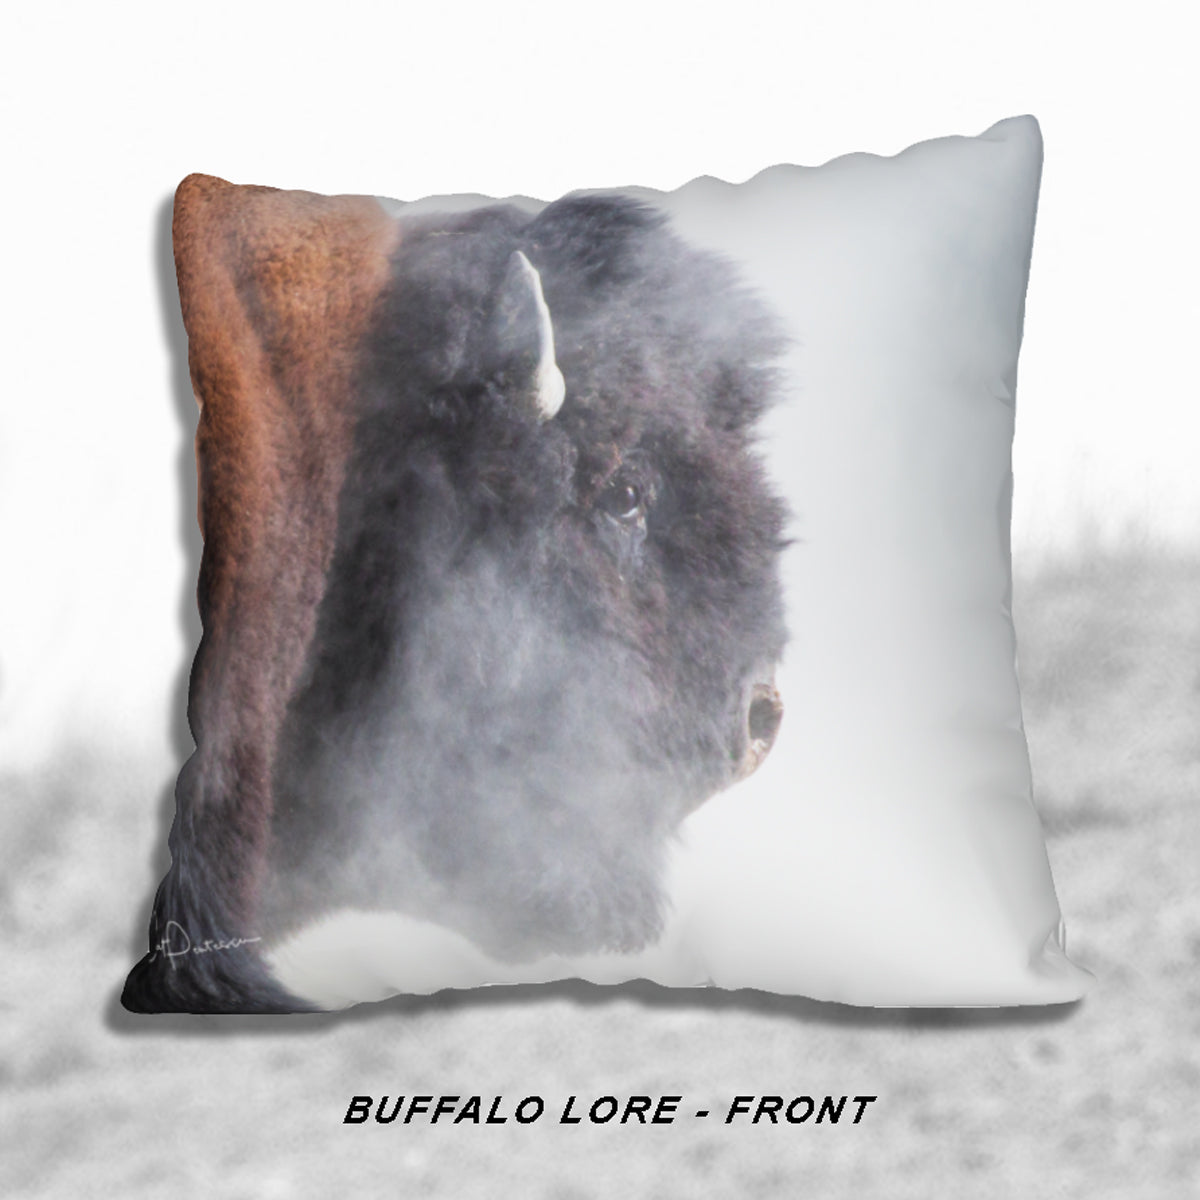 BUFFALO LORE ACCENT PILLOW COVER